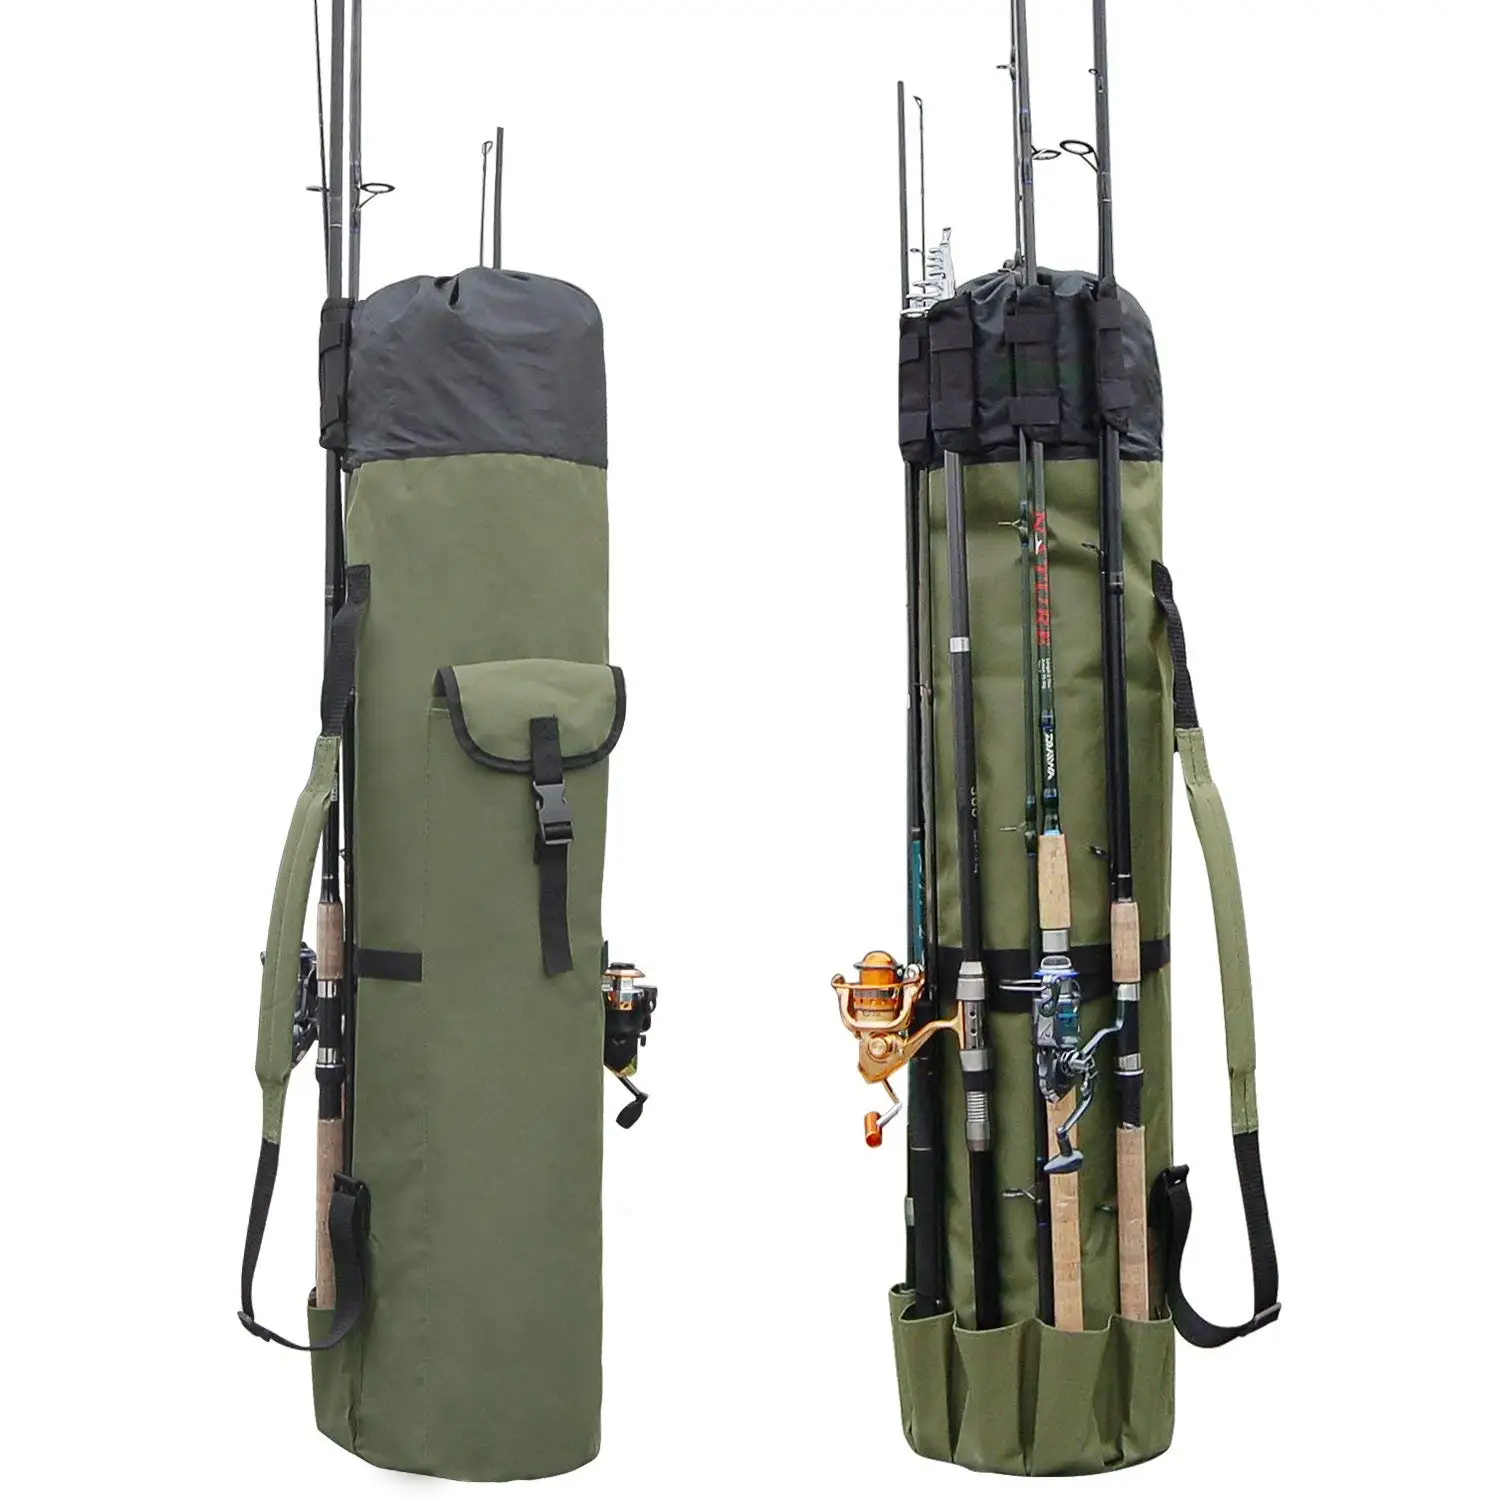 160cm Waterproof Fishing Rod Bag Carrier Folding Case Organizer Easy To Carry 